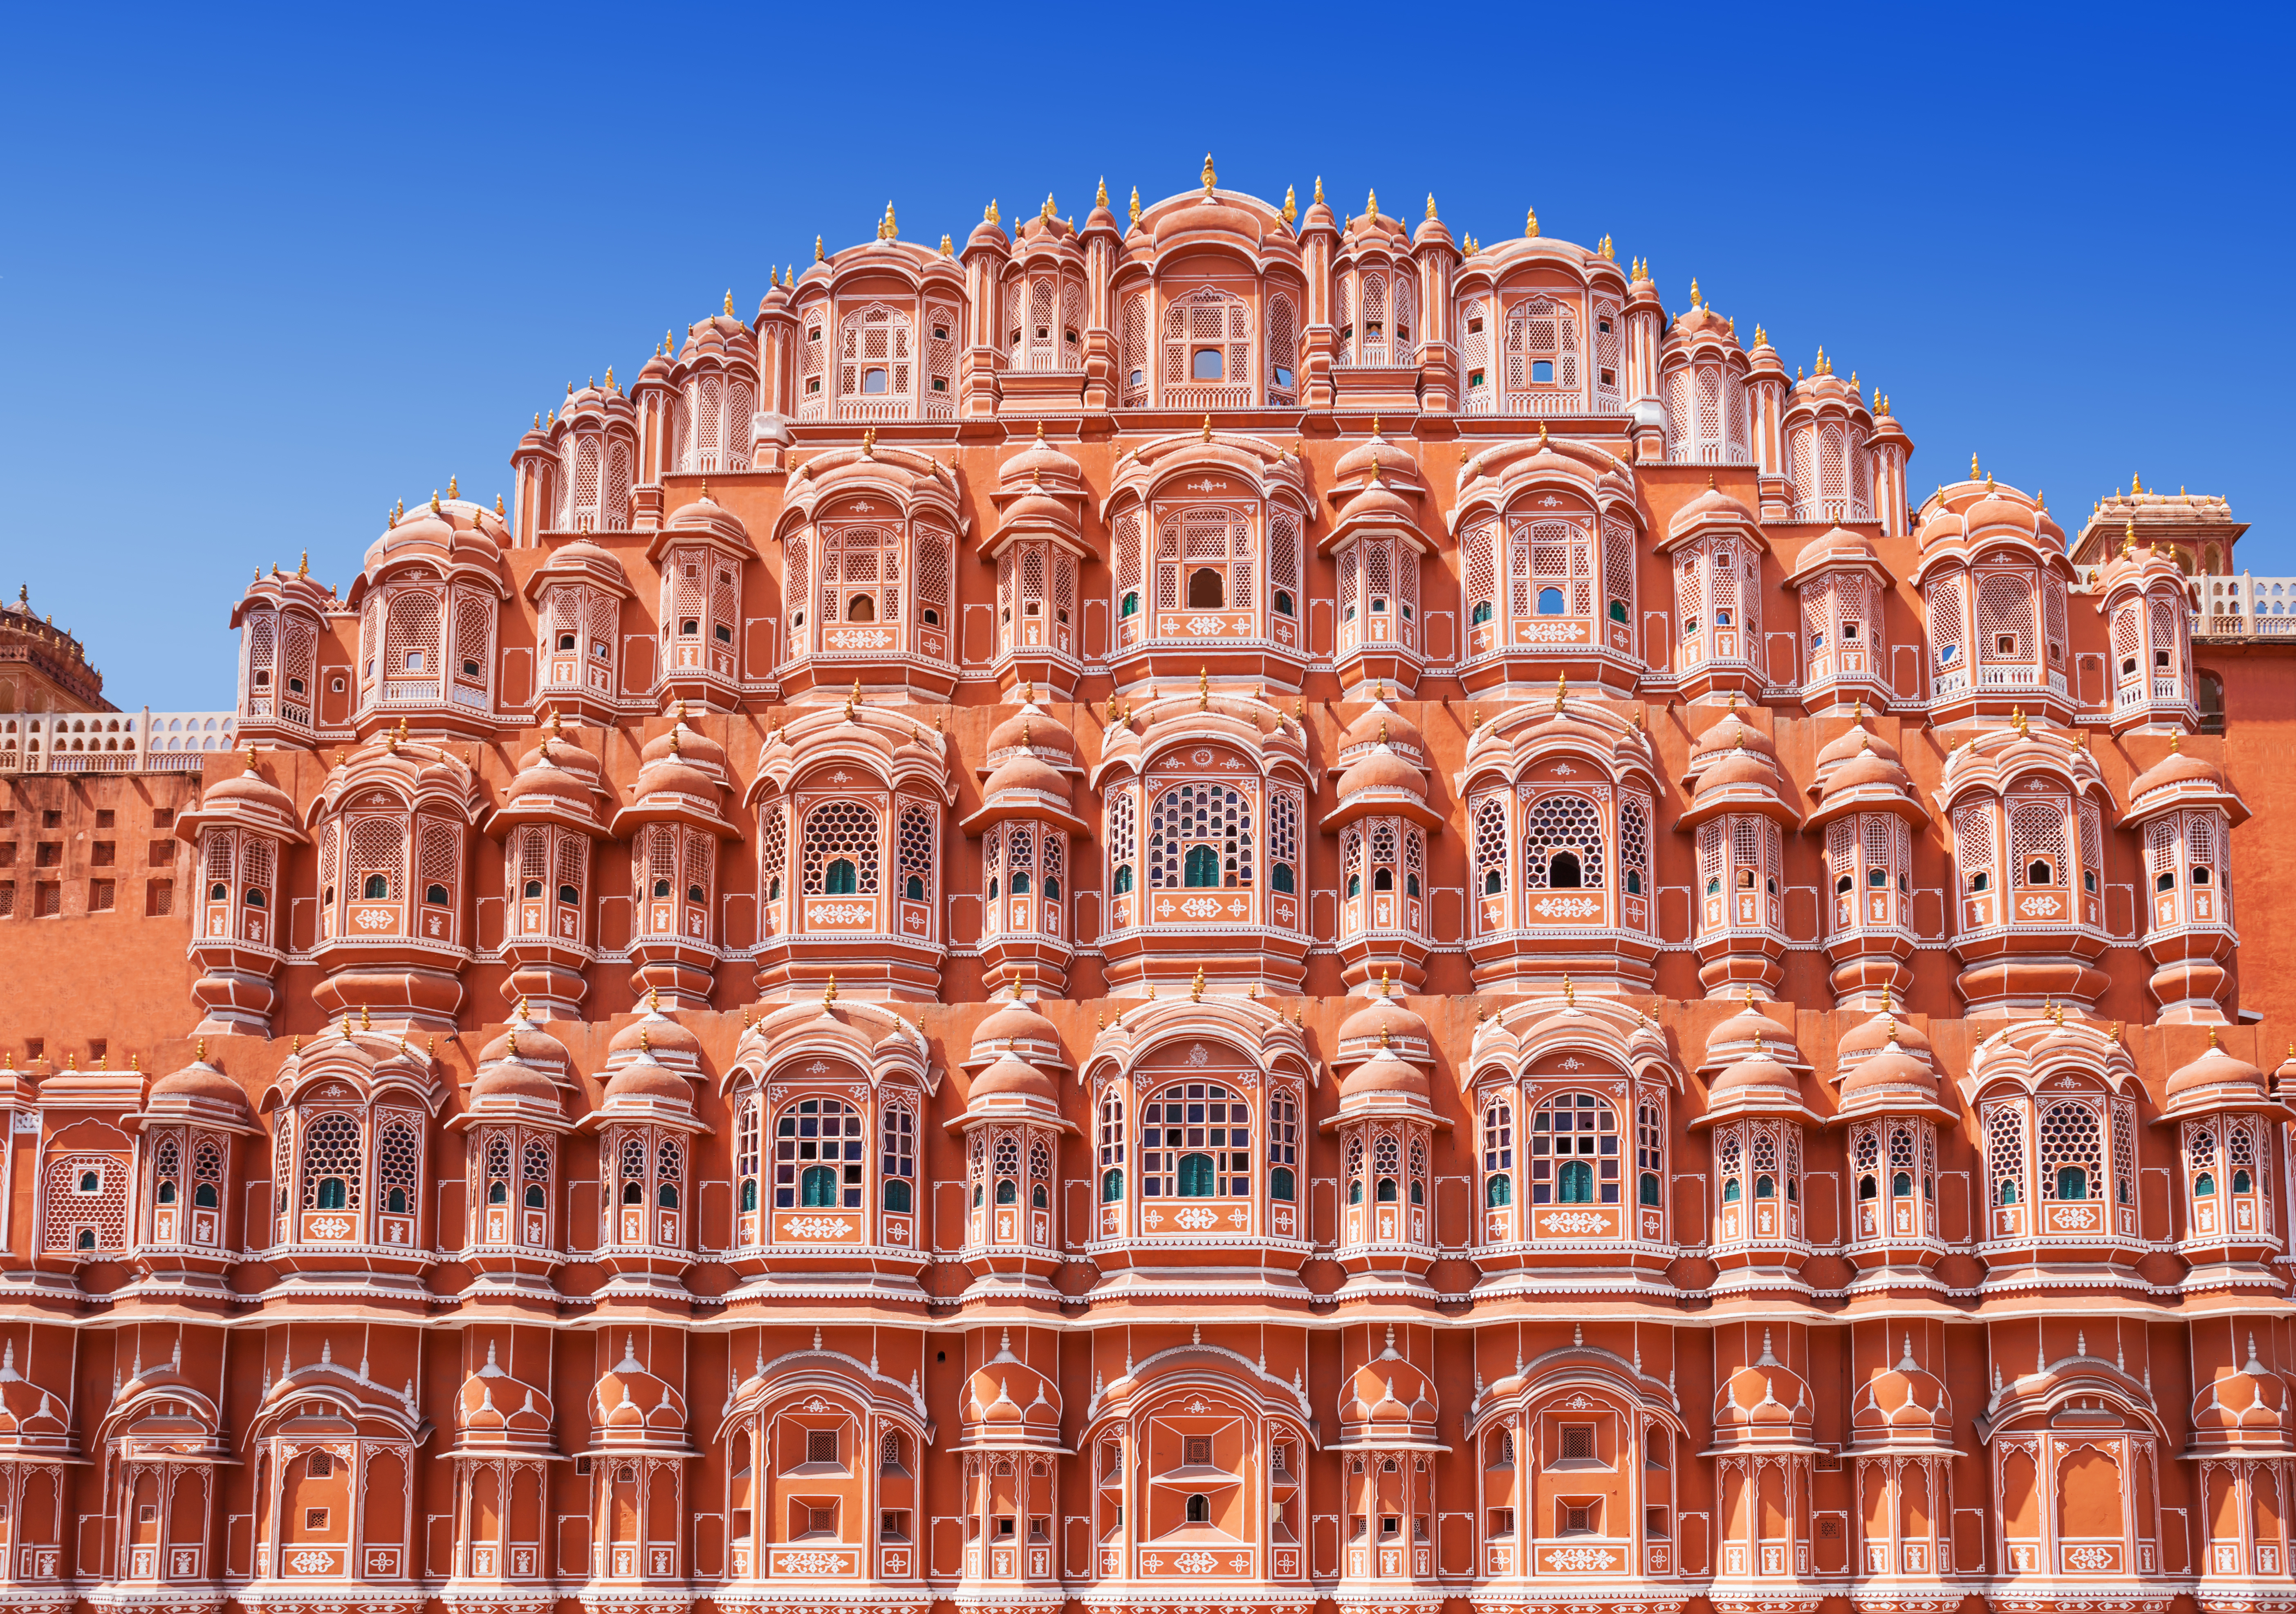 Hawa Mahal | Jaipur, India Attractions - Lonely Planet